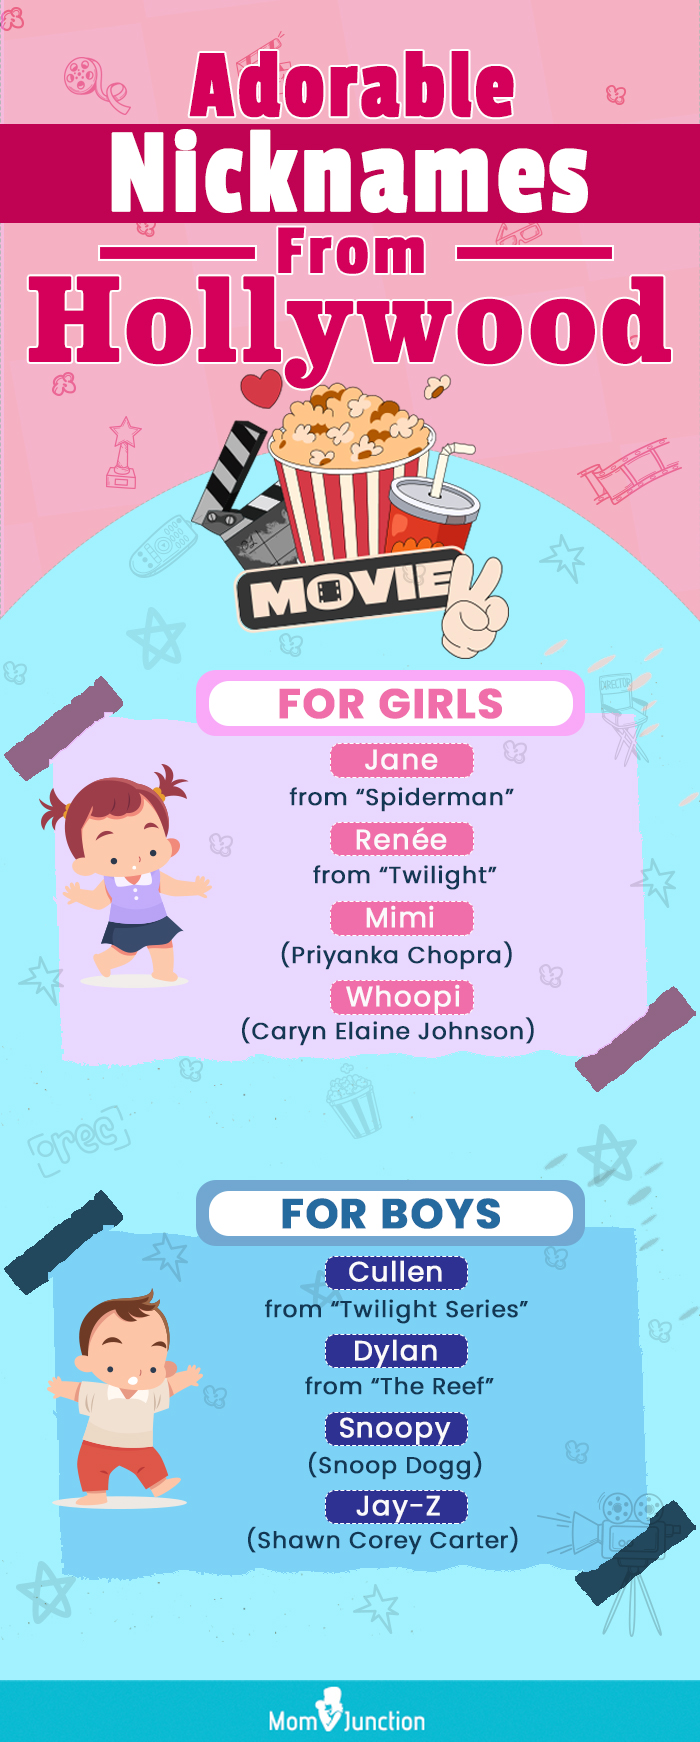 adorable nicknames straight from hollywood [infographic]